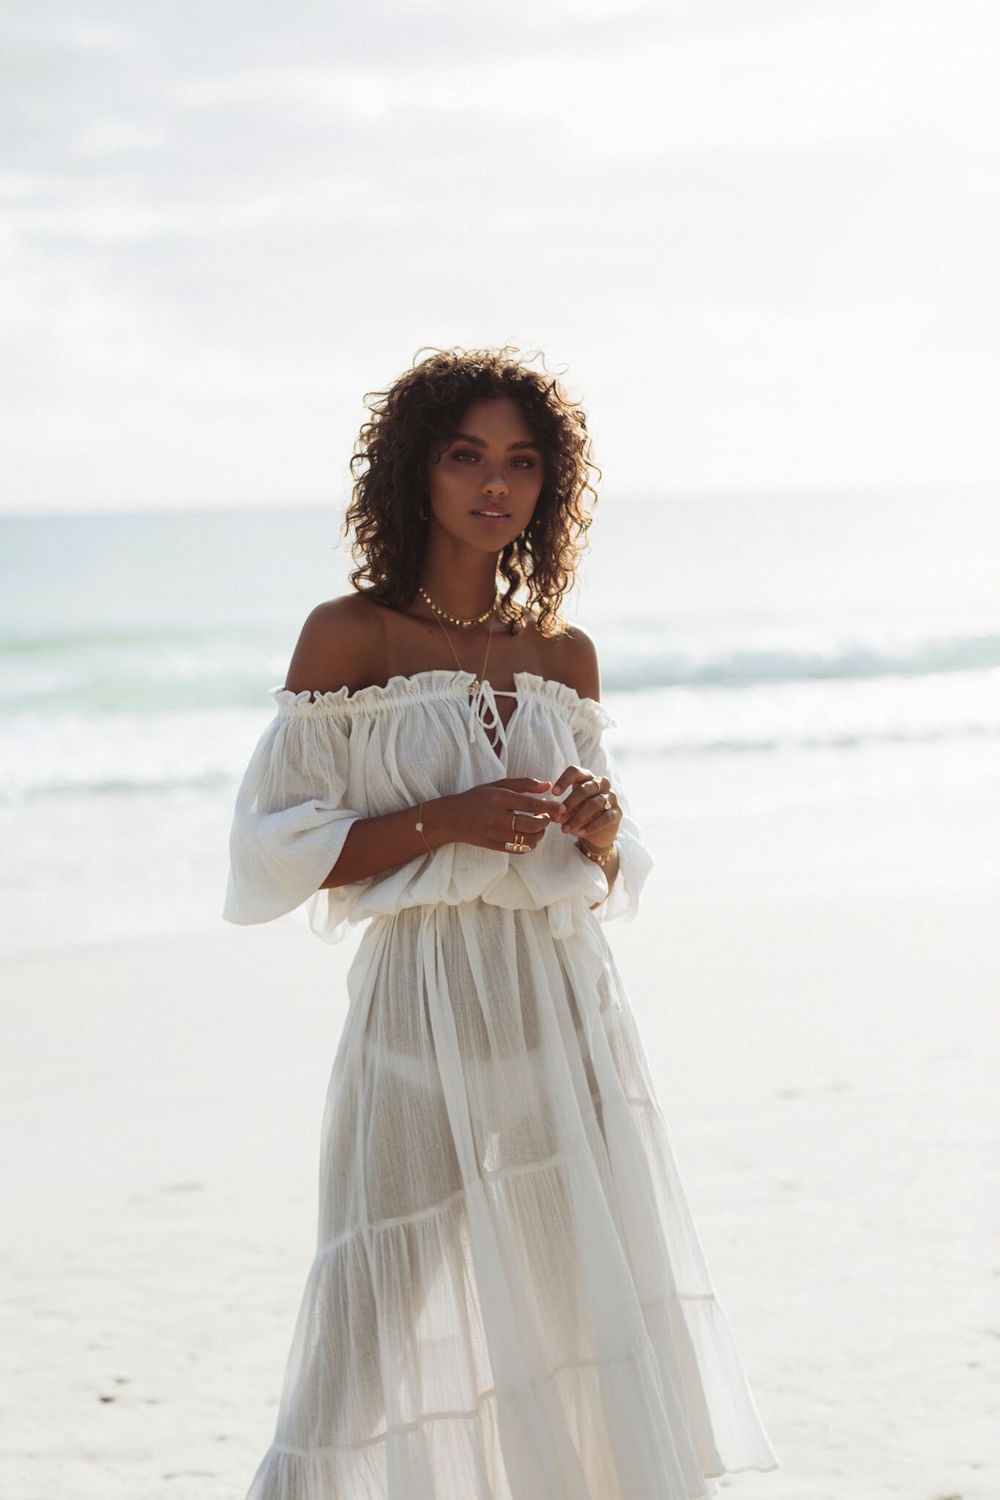 WHERE THE SKY MEETS THE SEA | KRYSTLE KNIGHT JEWELLERY CAMPAIGN